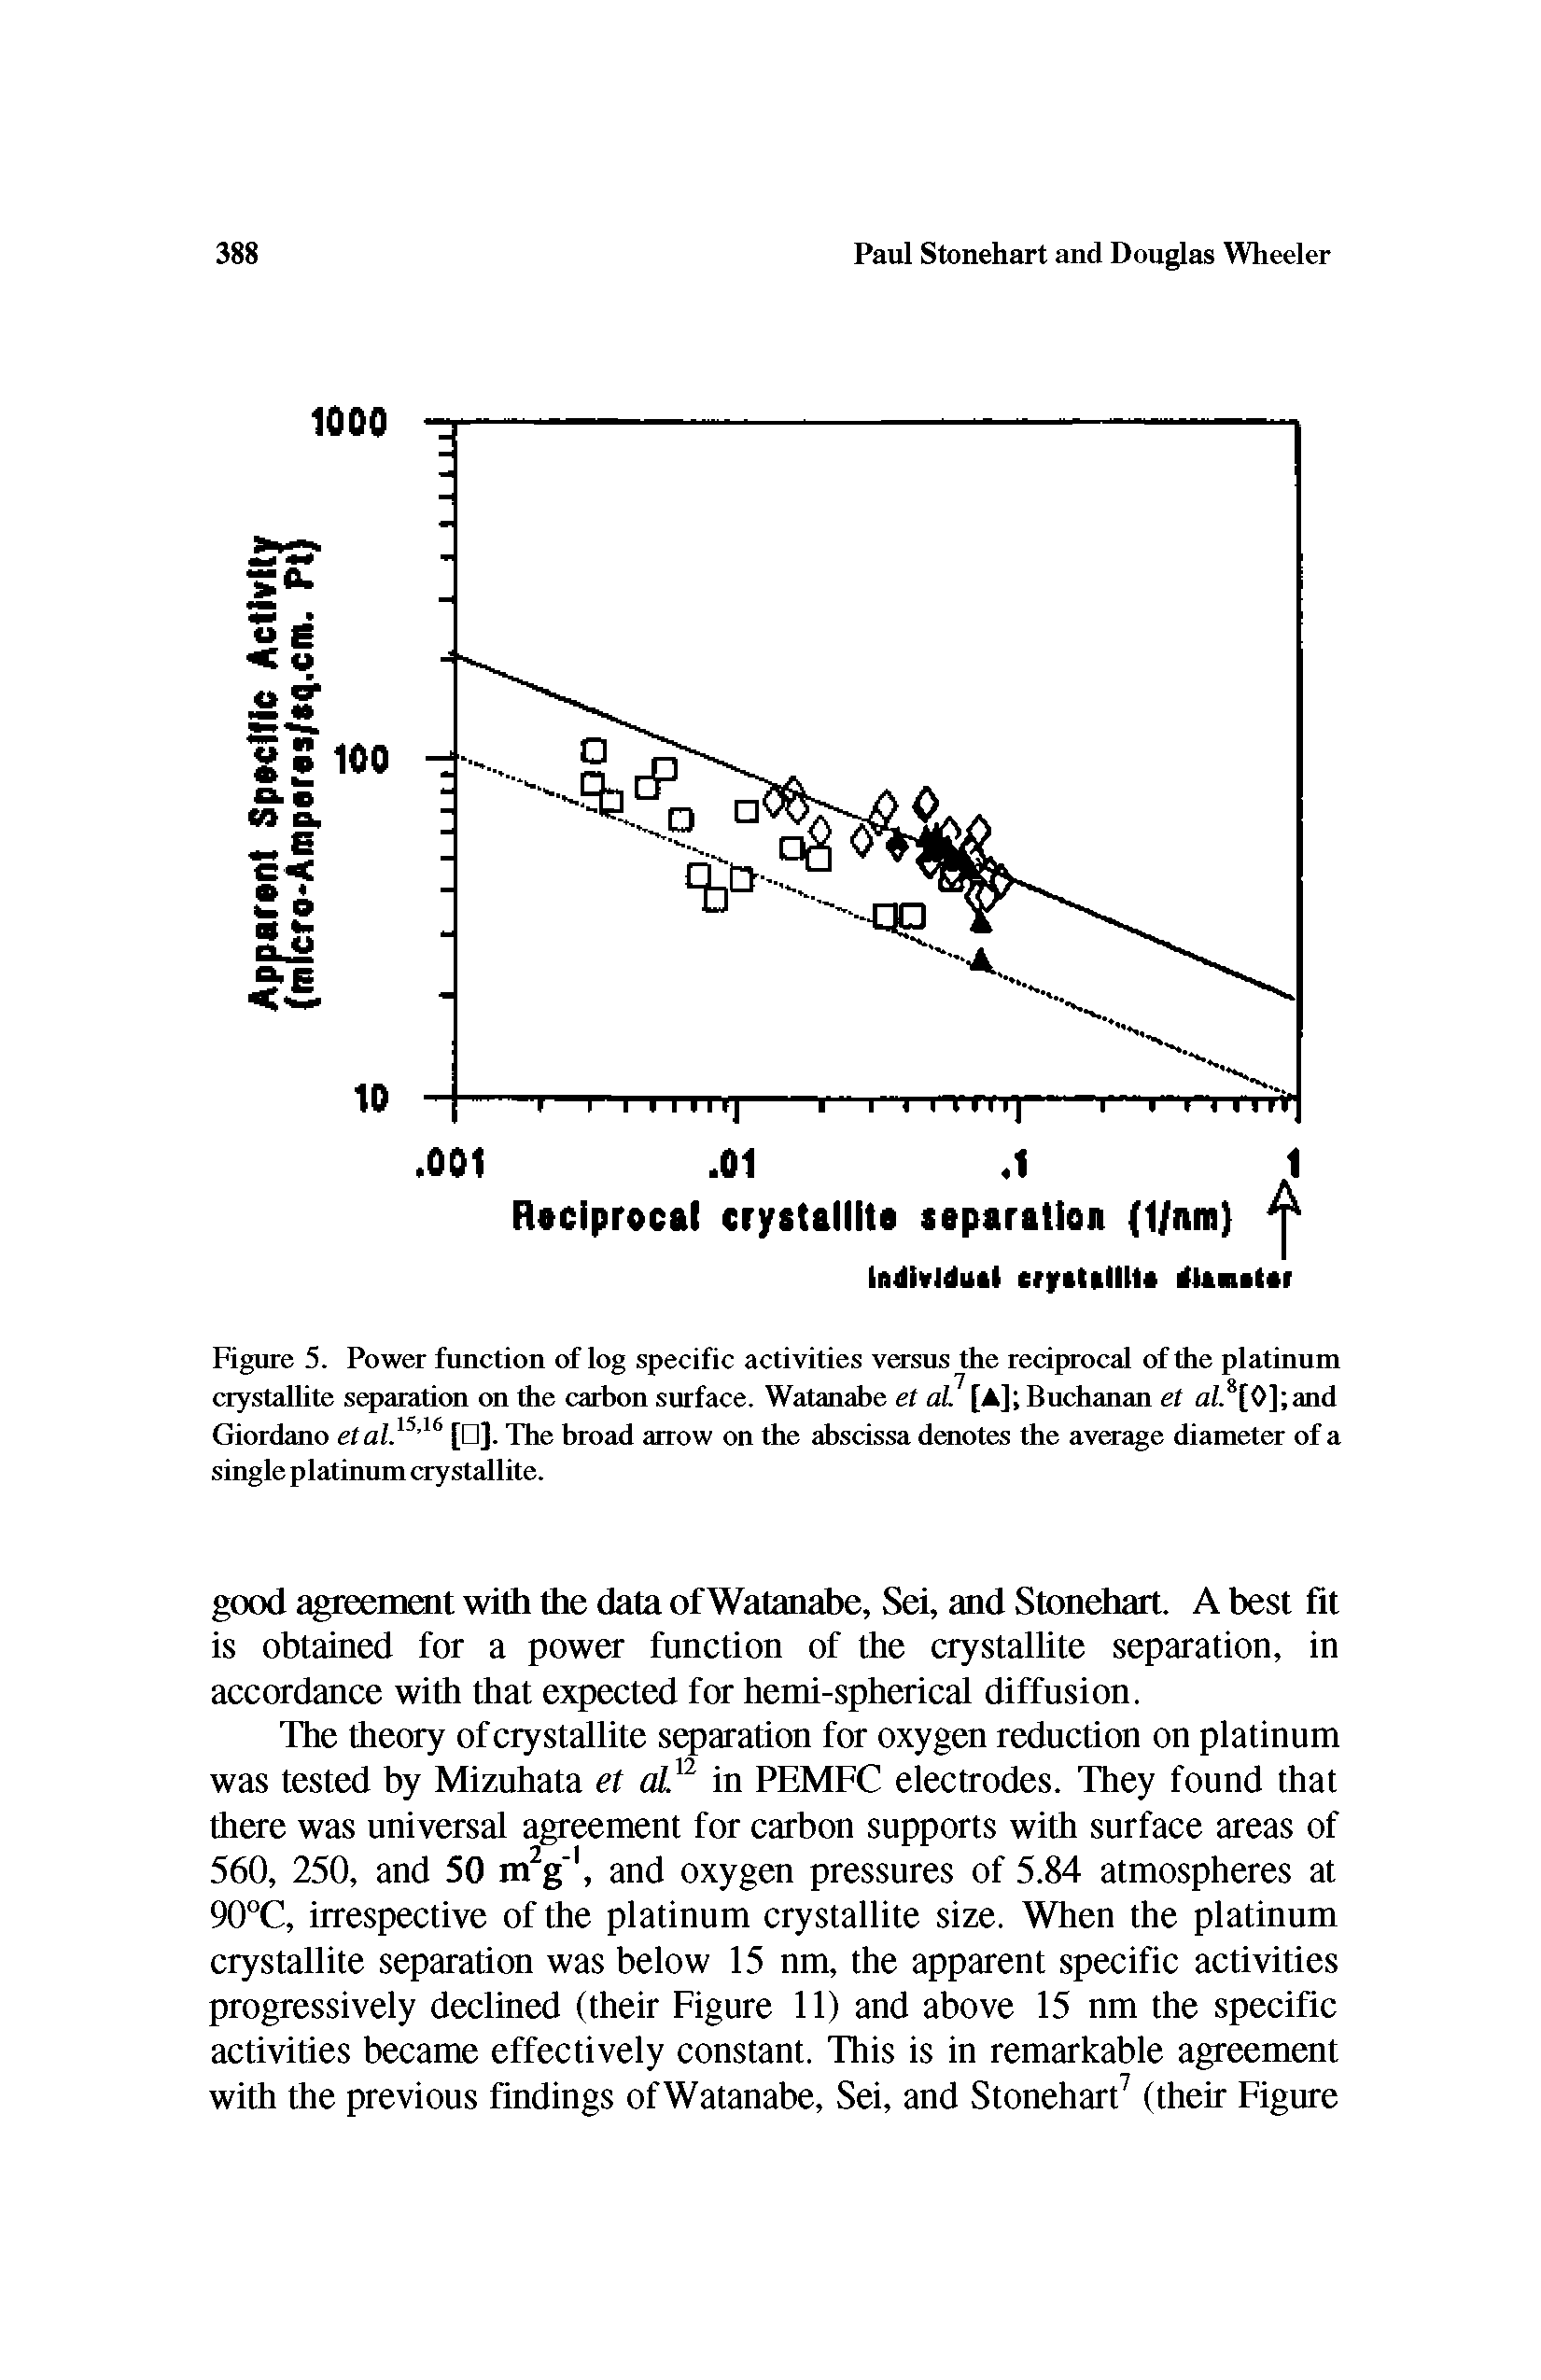 Figure 5. Power function of log specific activities versus the reciprocal of the platinum crystallite separation on the carbon surface. Watanabe et at [A] Buchanan et aZ.[0] and Giordano etal.15 16 [ ]. The broad arrow on the abscissa denotes the average diameter of a single platinum crystallite.